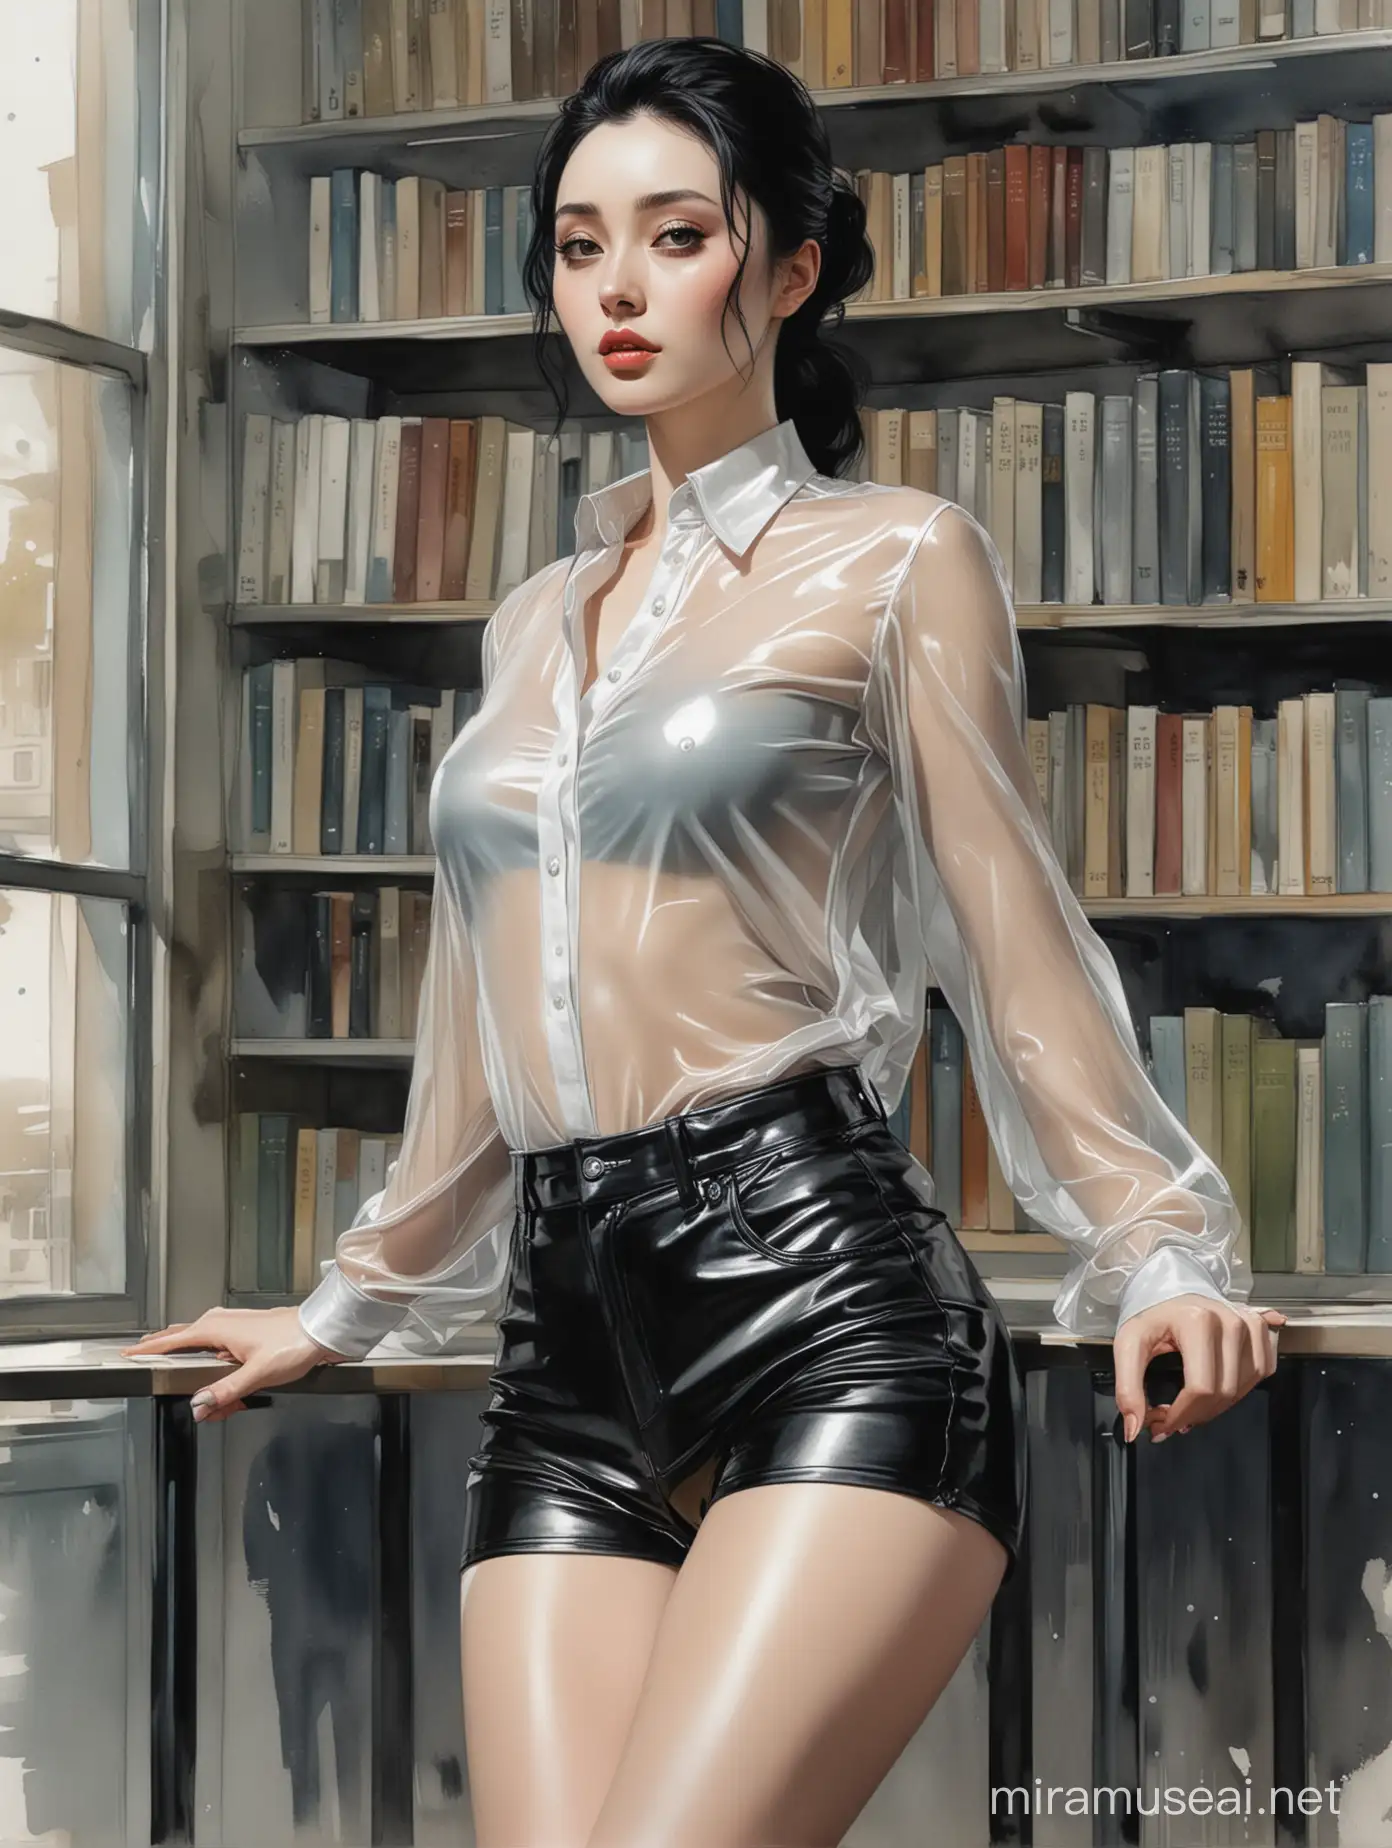 Alluring Fan Bingbing in Transparent School Blouse and Leather Pants at Library Shelf